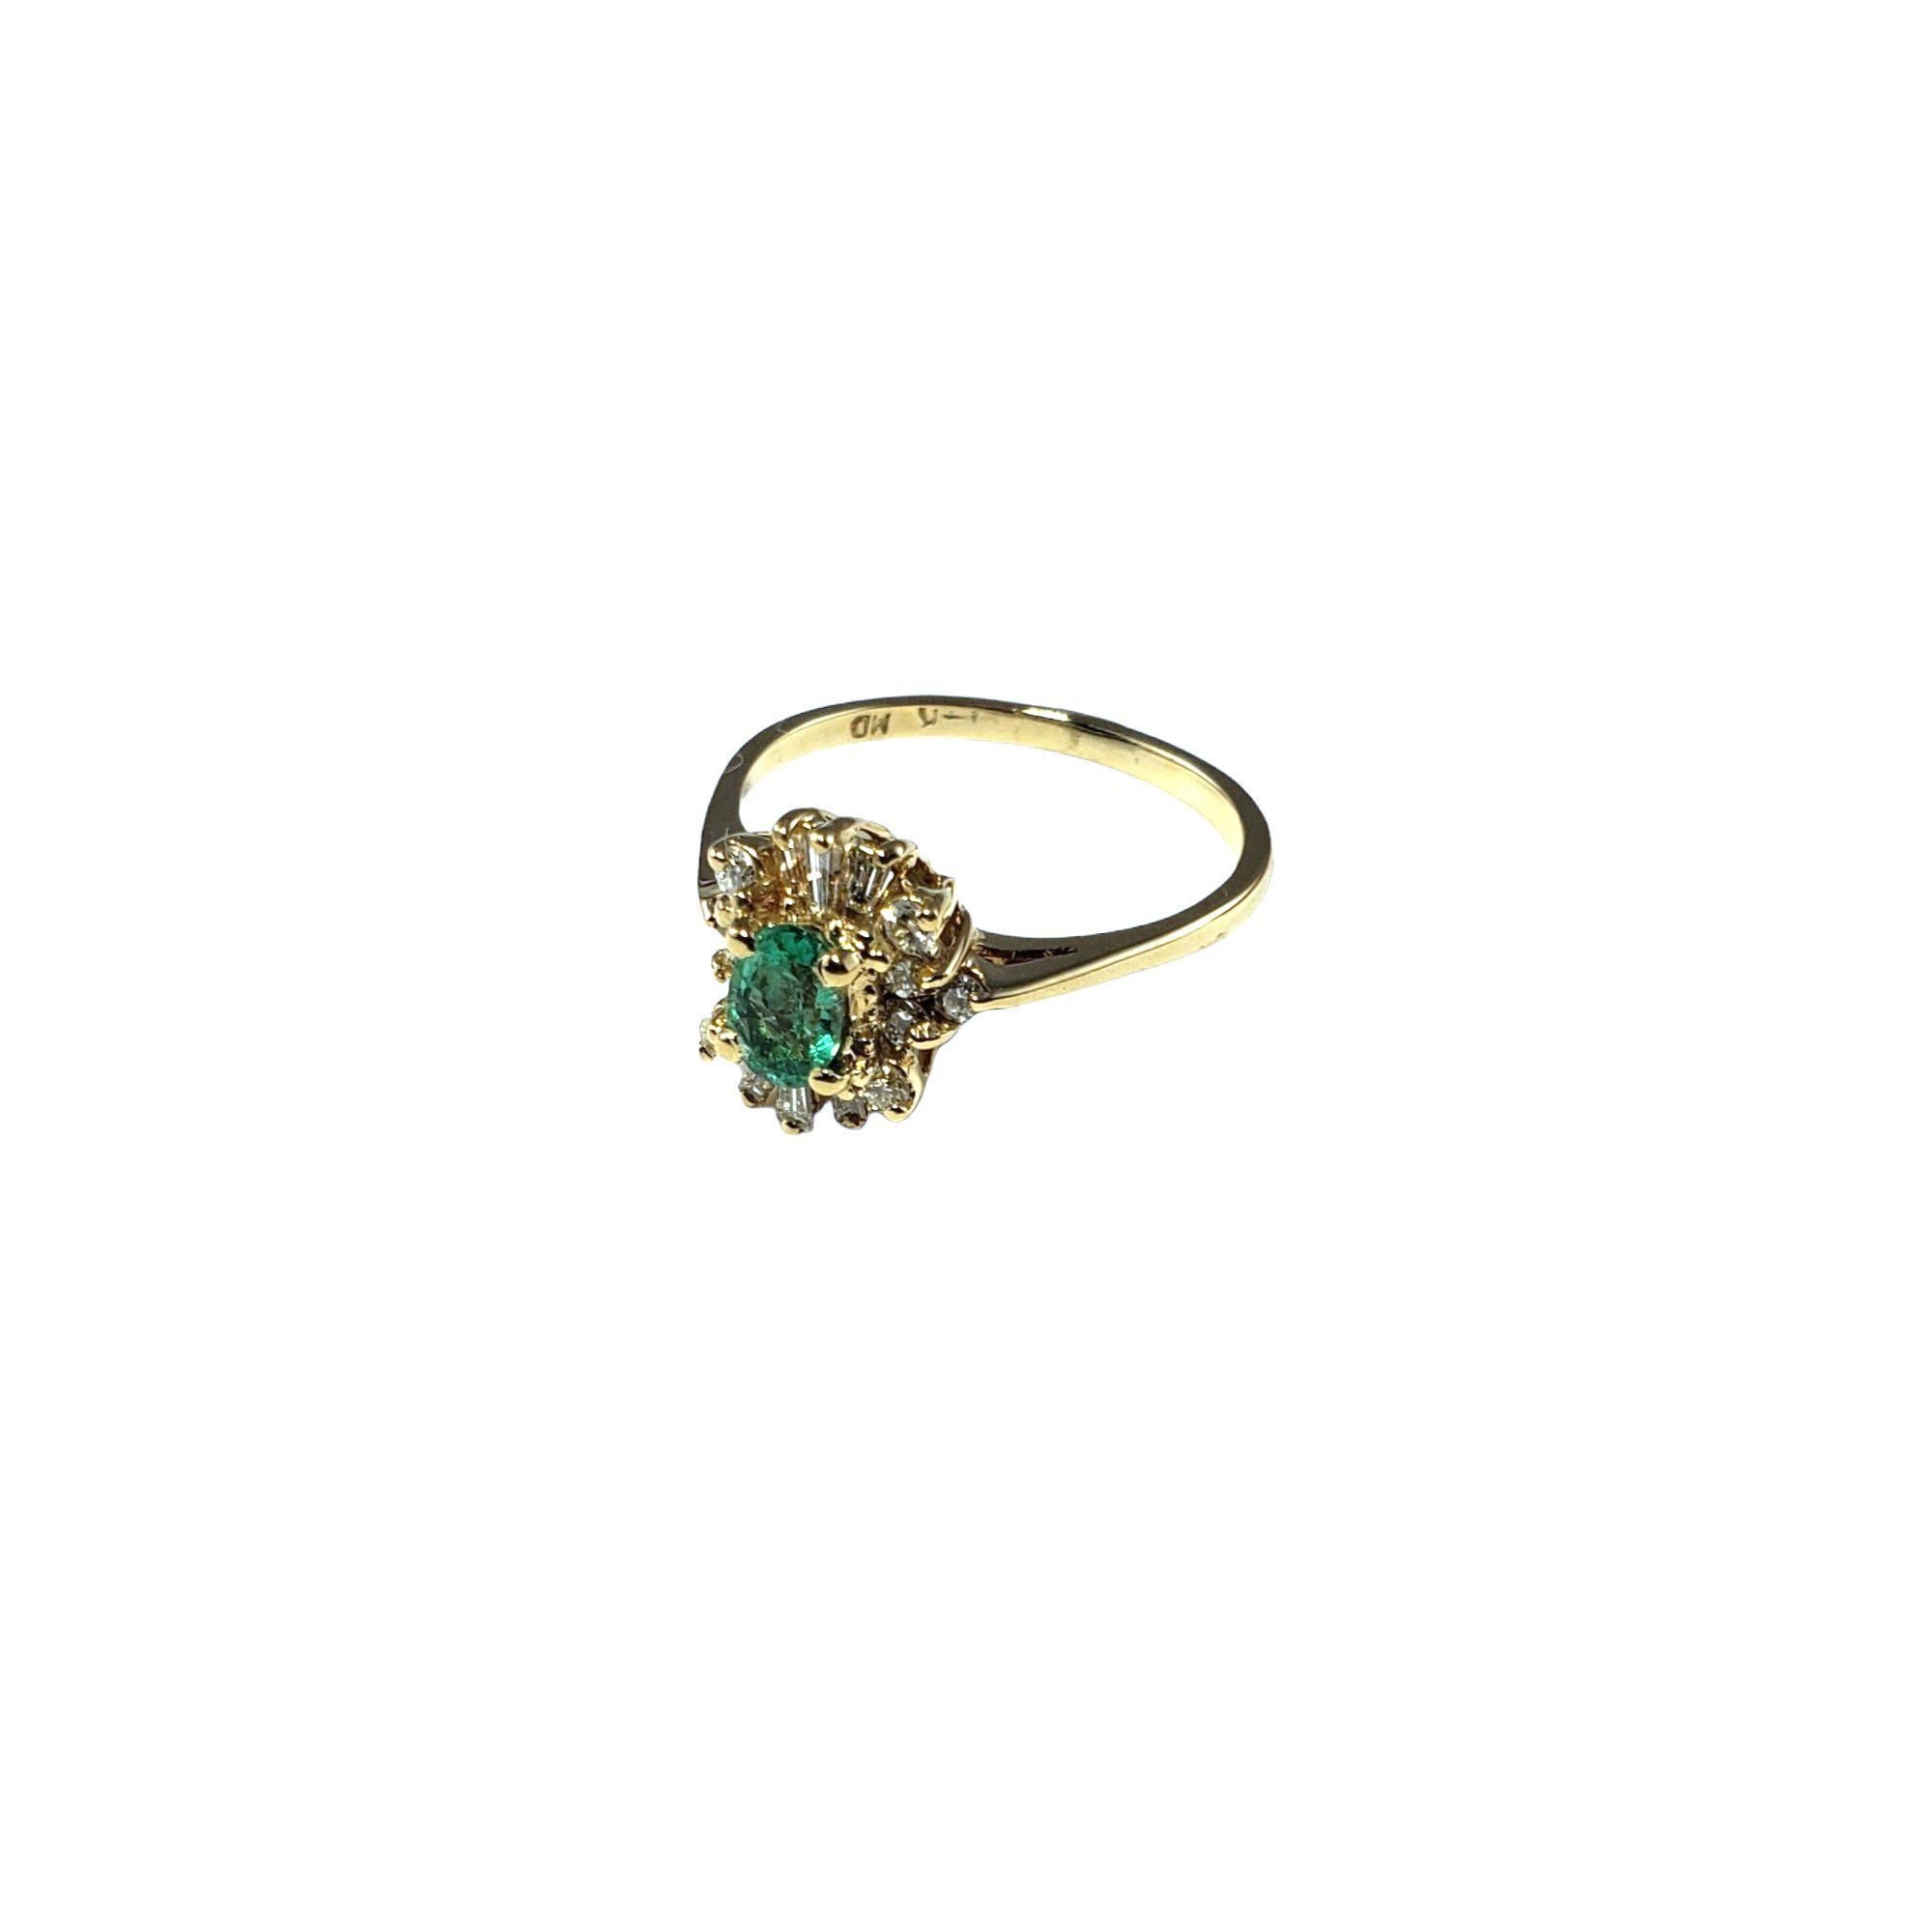 Vintage 14 Karat Yellow Gold and Diamond Ring Size 8

This gorgeous 14K gold ring features one oval emerald (5.7 mm x 4.1 mm) surrounded by 10 round brilliant cut diamonds and 6 baguette cut diamonds for a unique, beautiful final design!

Emerald